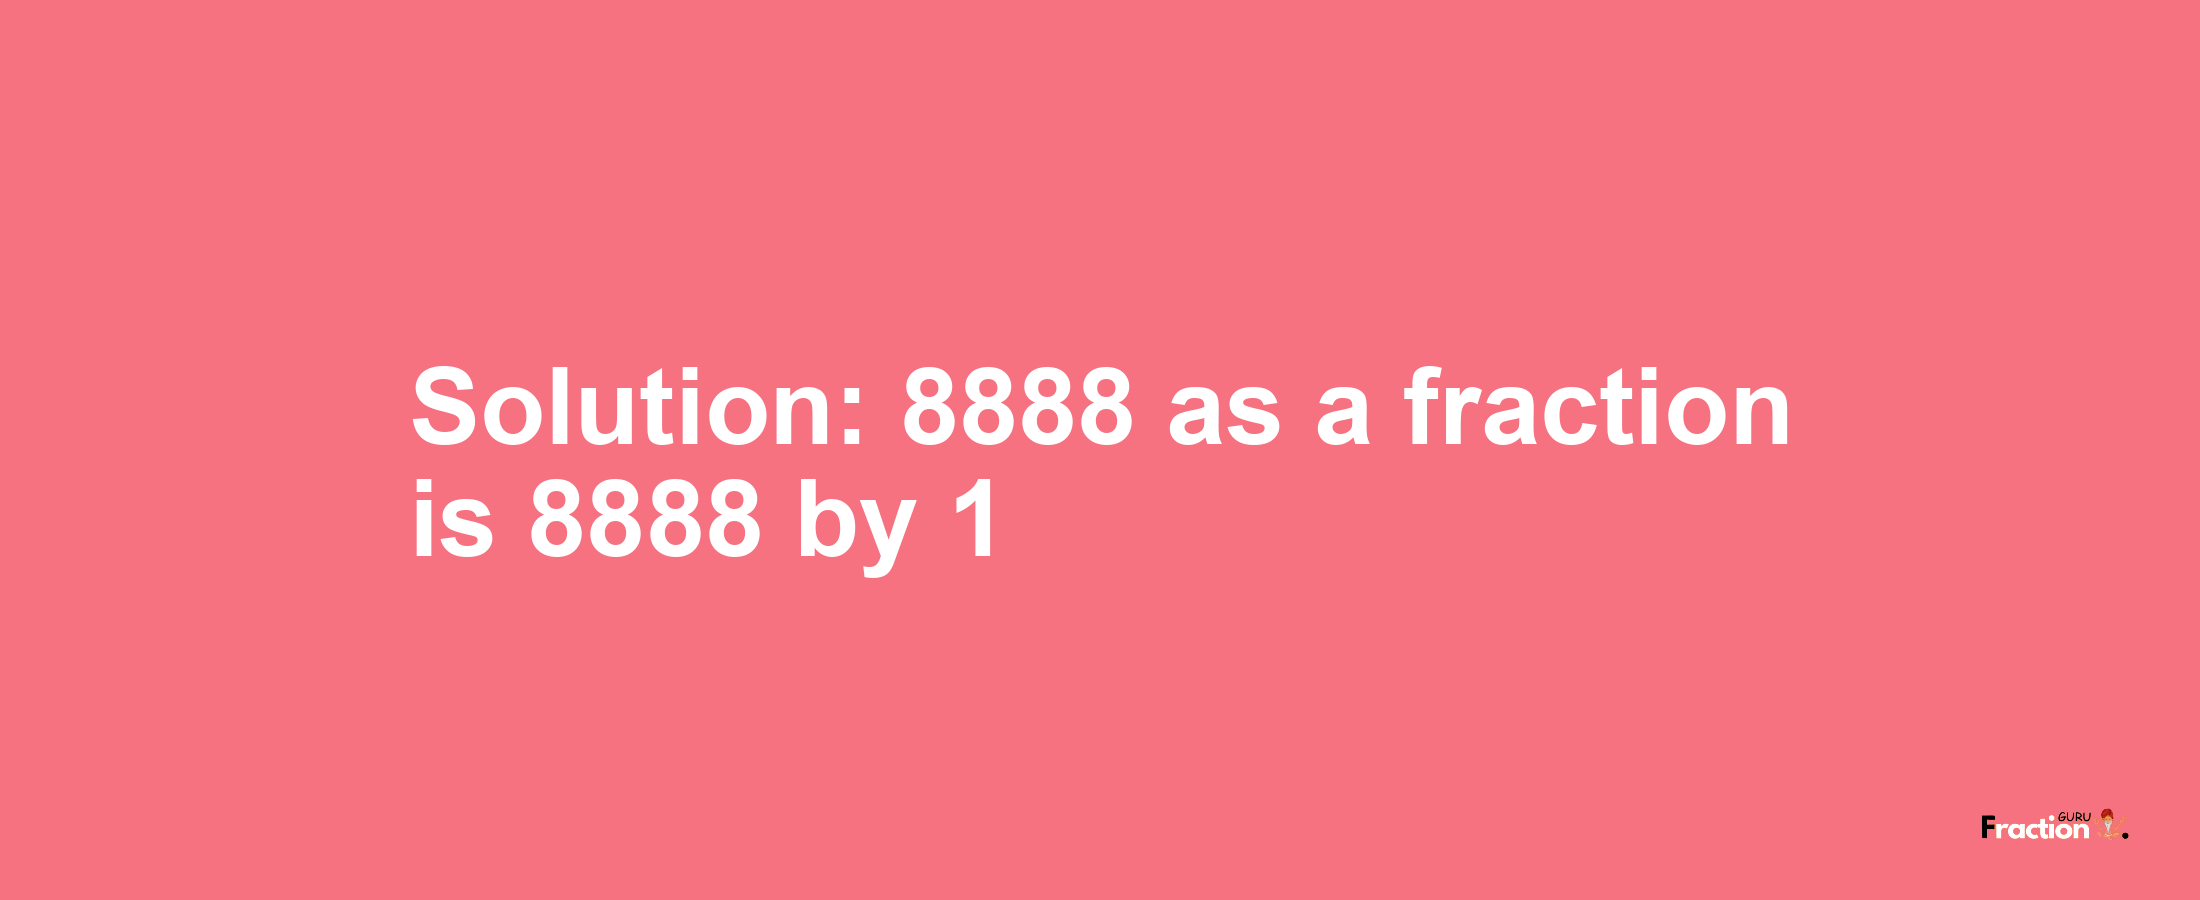 Solution:8888 as a fraction is 8888/1